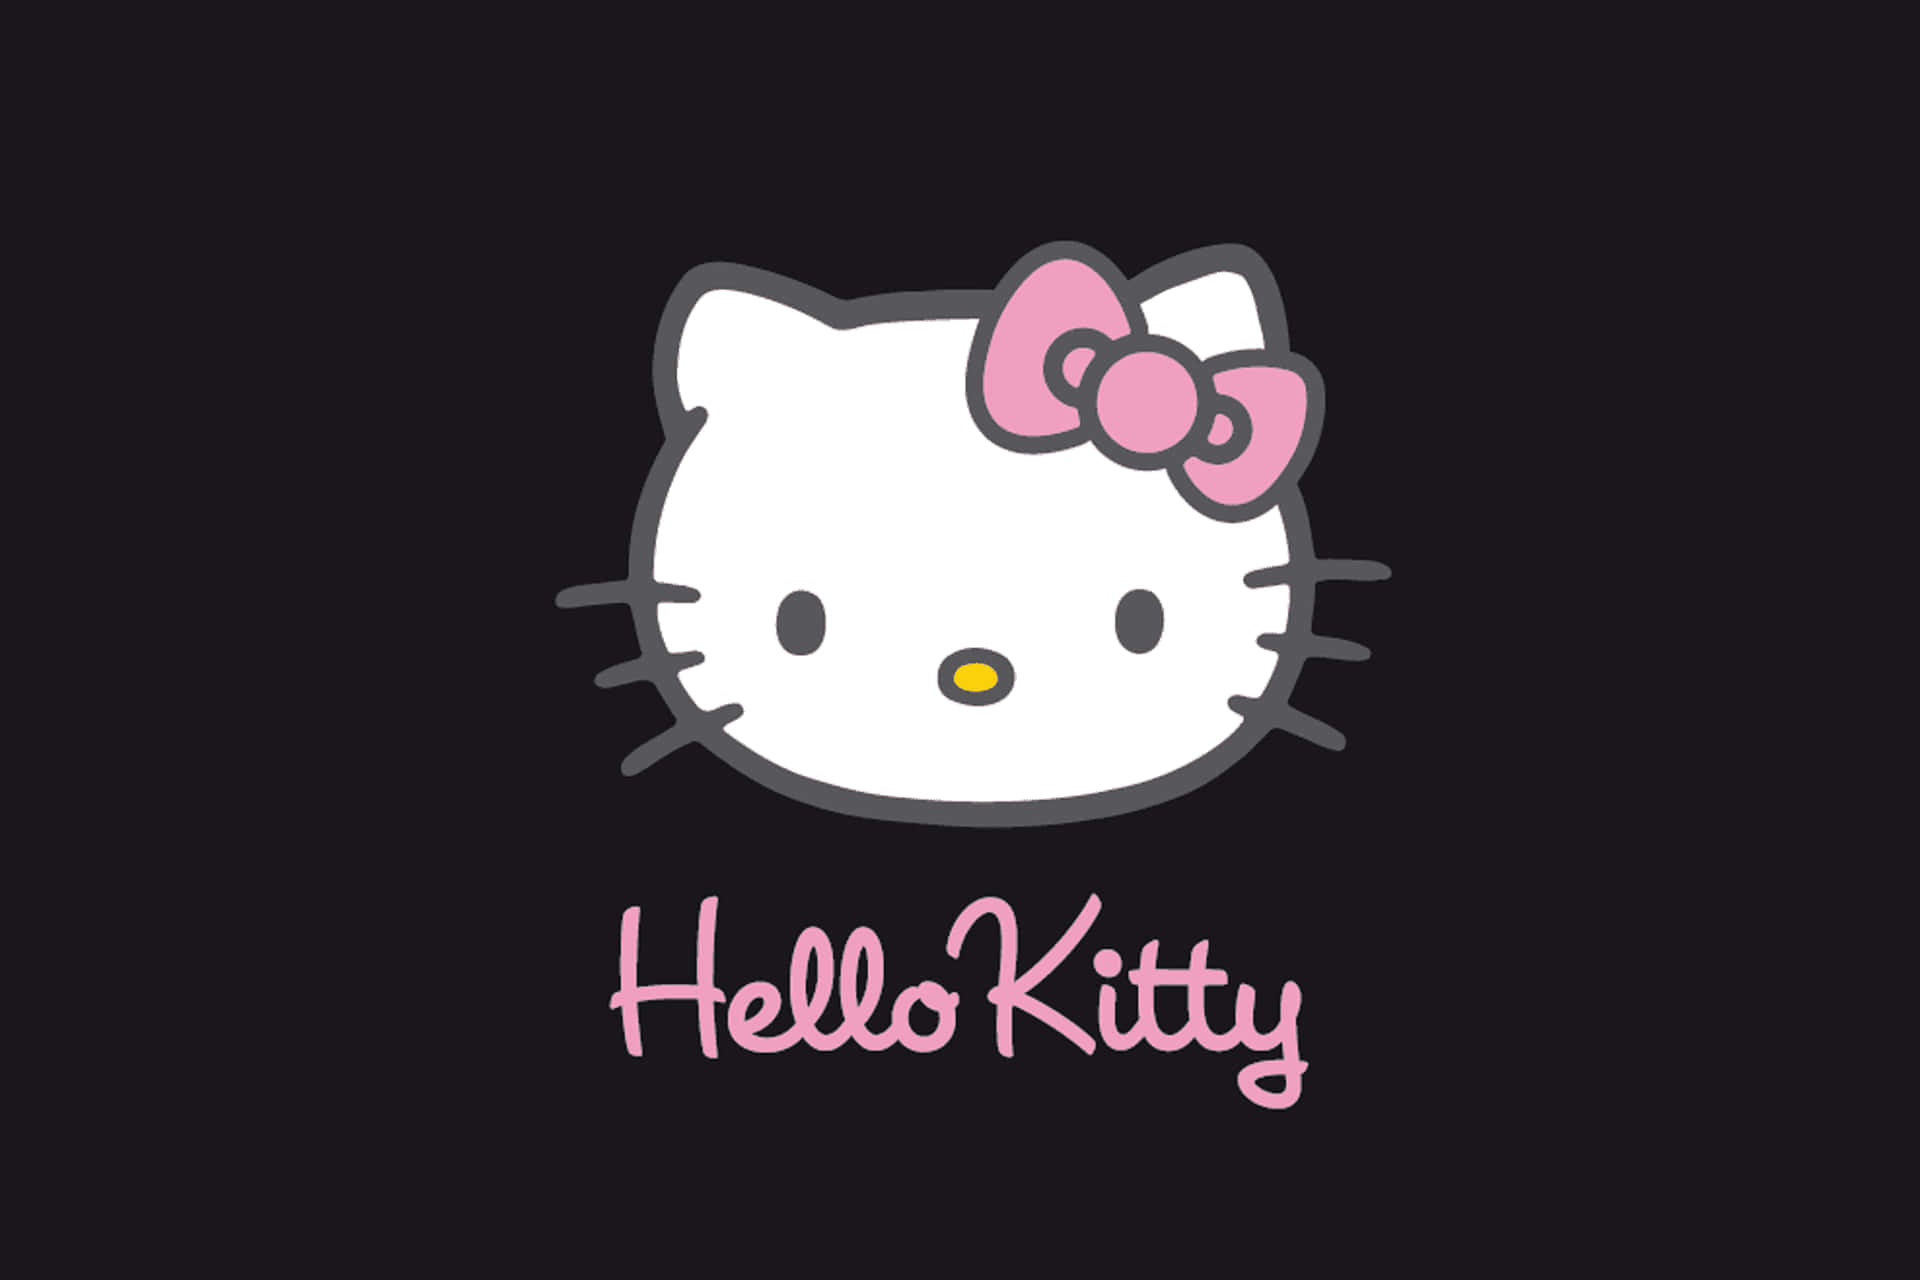 Stay Cute and Connected with the Hello Kitty PC Wallpaper